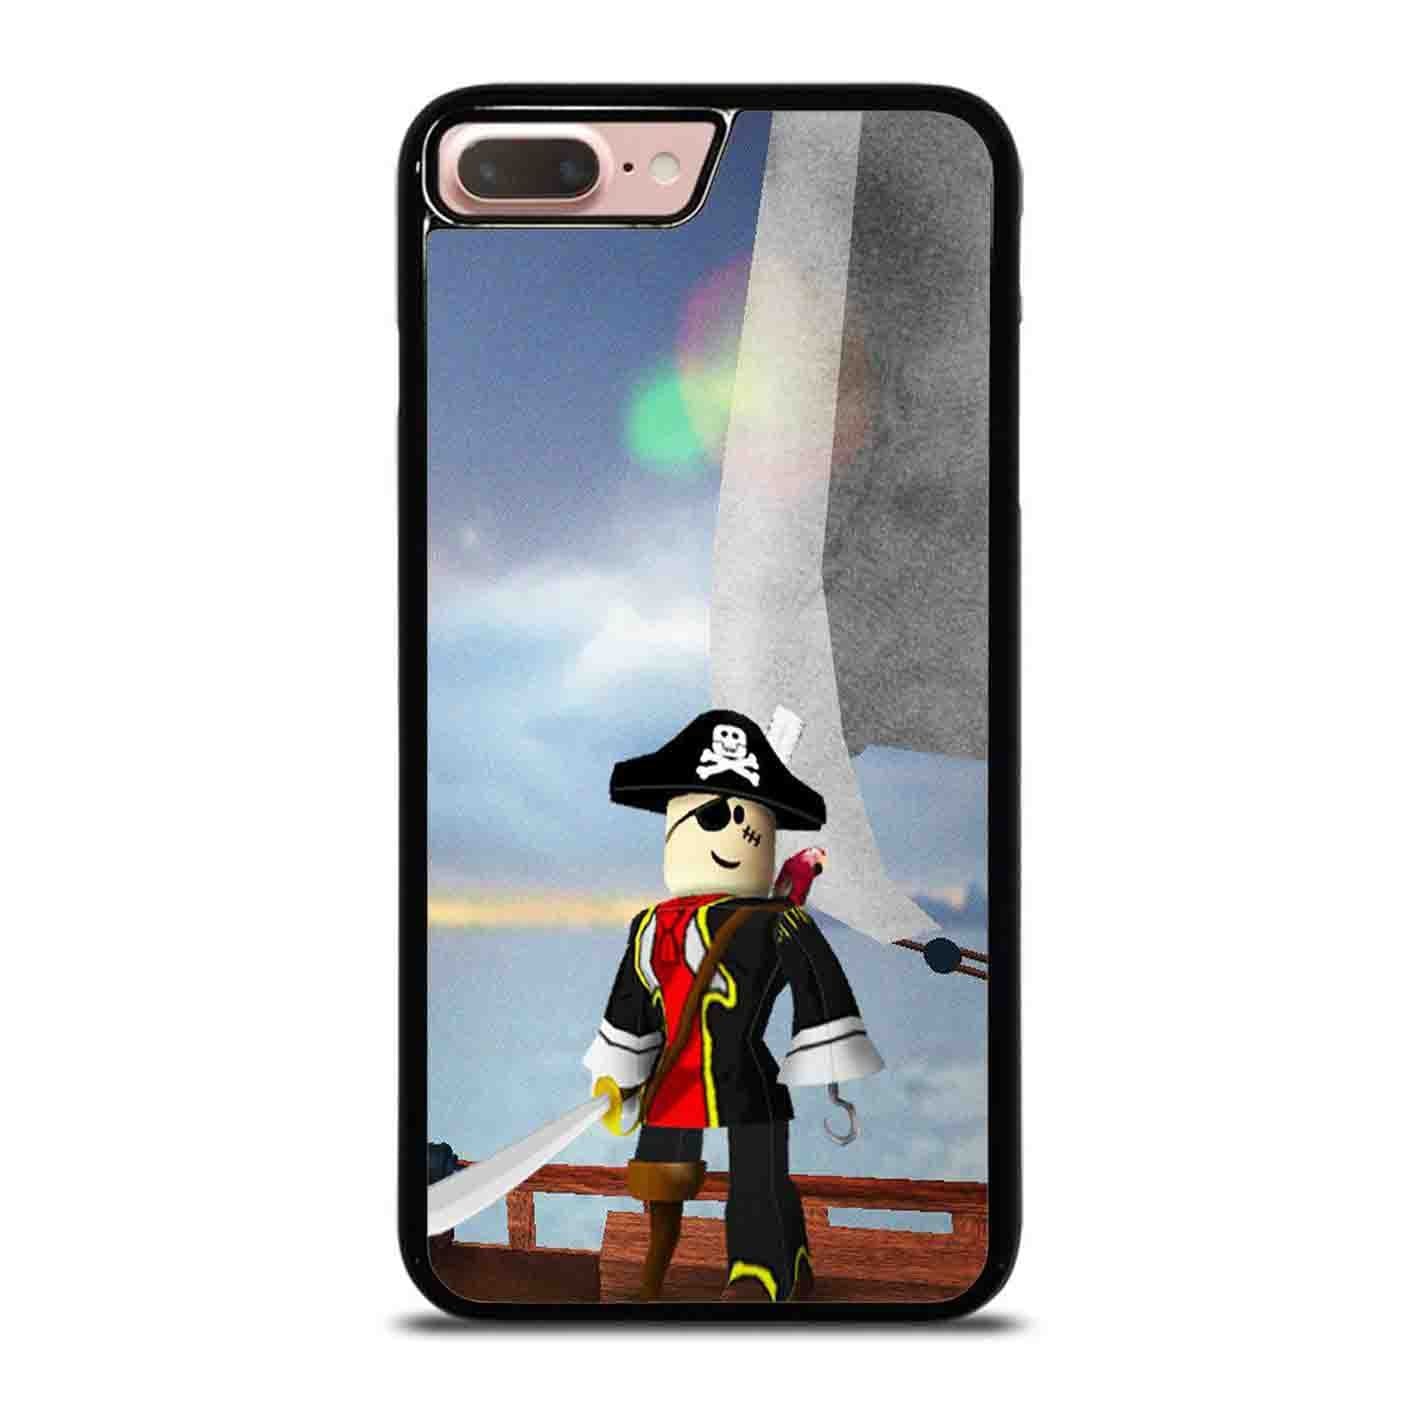 Roblox Artwork 07 Iphone 8 Plus Case Cover Iphone And Android Teecustom - roblox ipod touch case